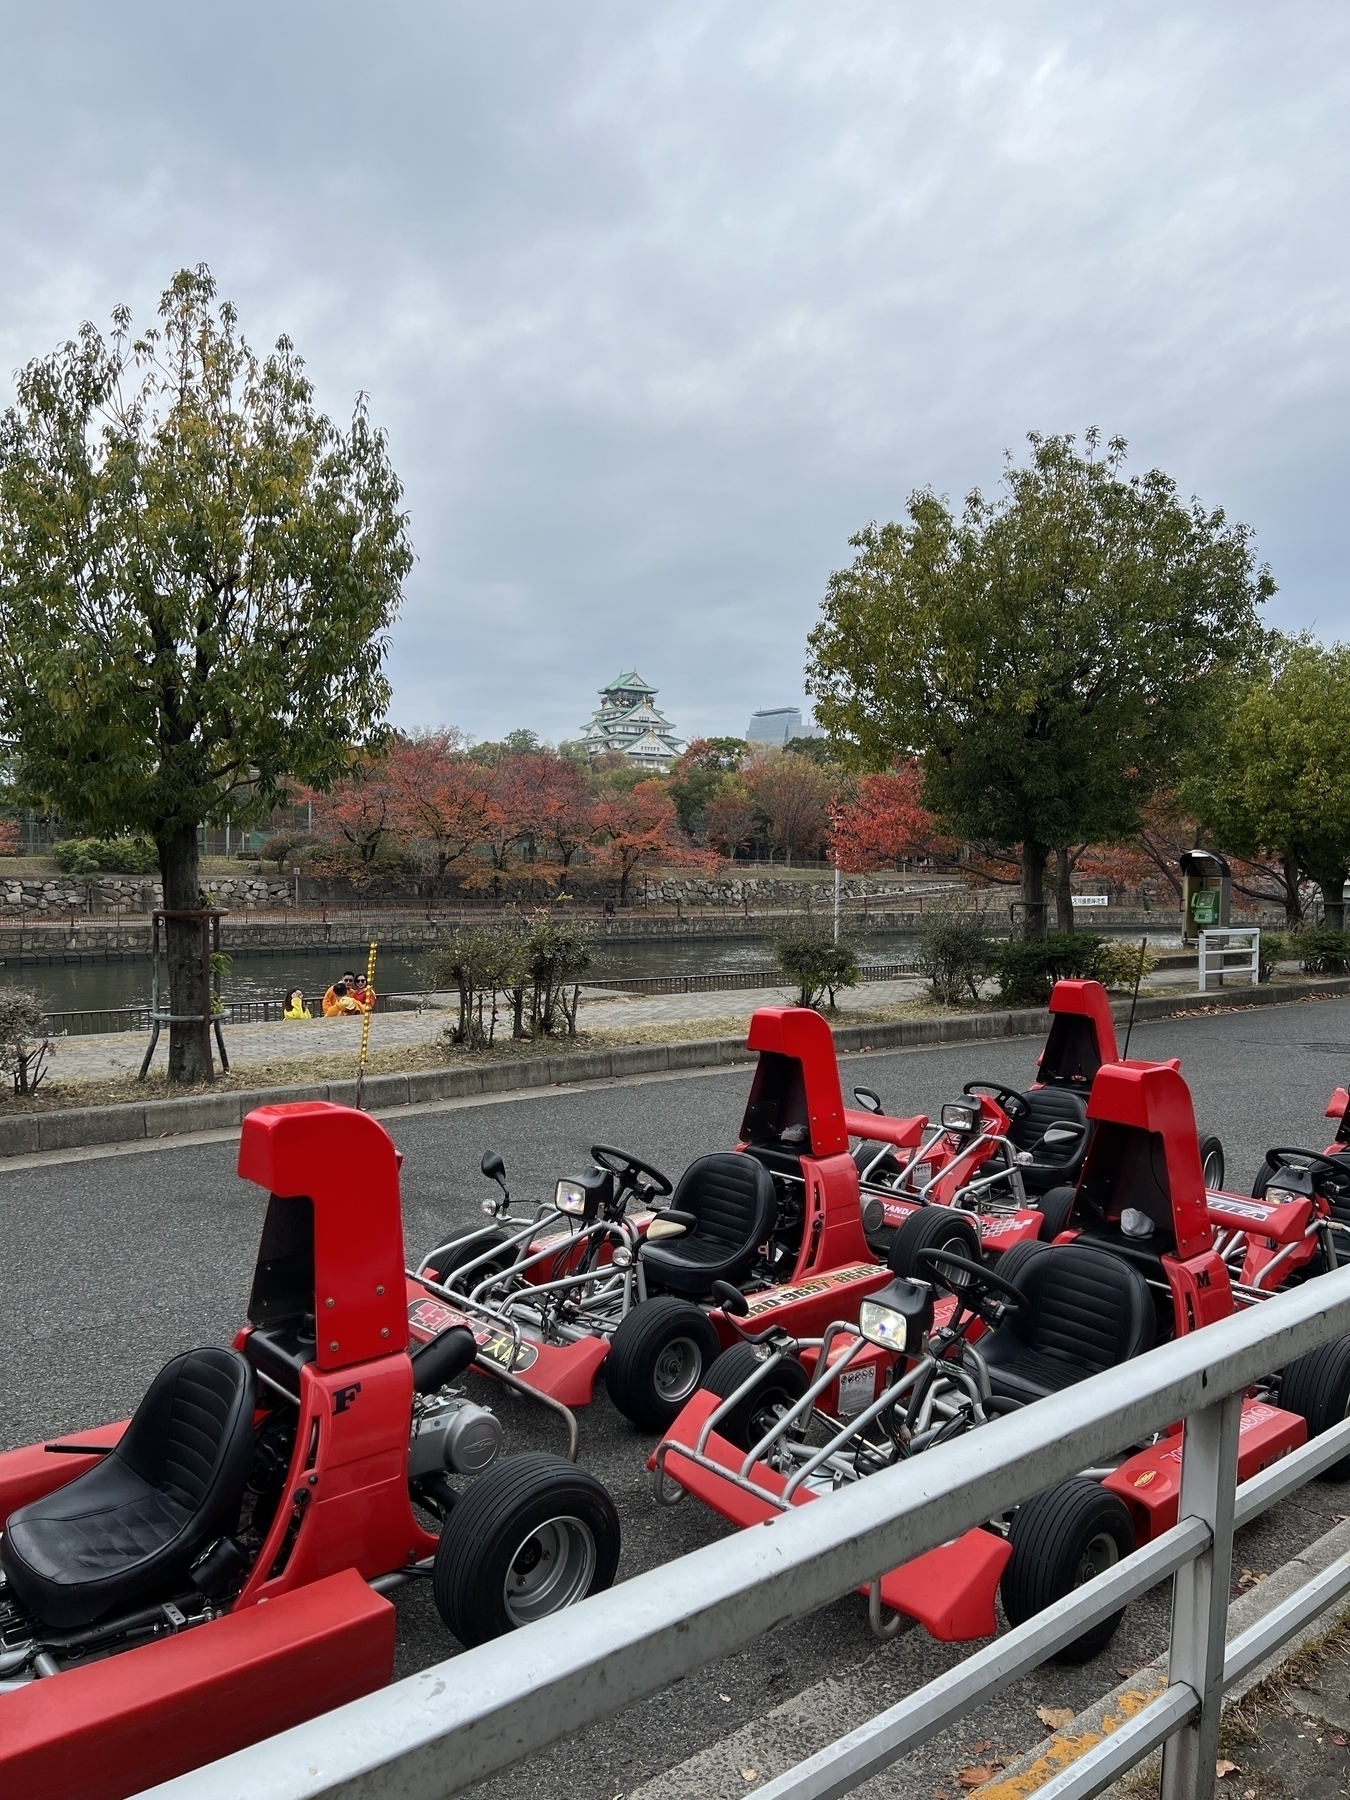 Five gokarts are parked on the side of the road. Drivers dressed in costumes (like Winnie the Pooh) are down by the moat taking photos with Osaka Castle in the background